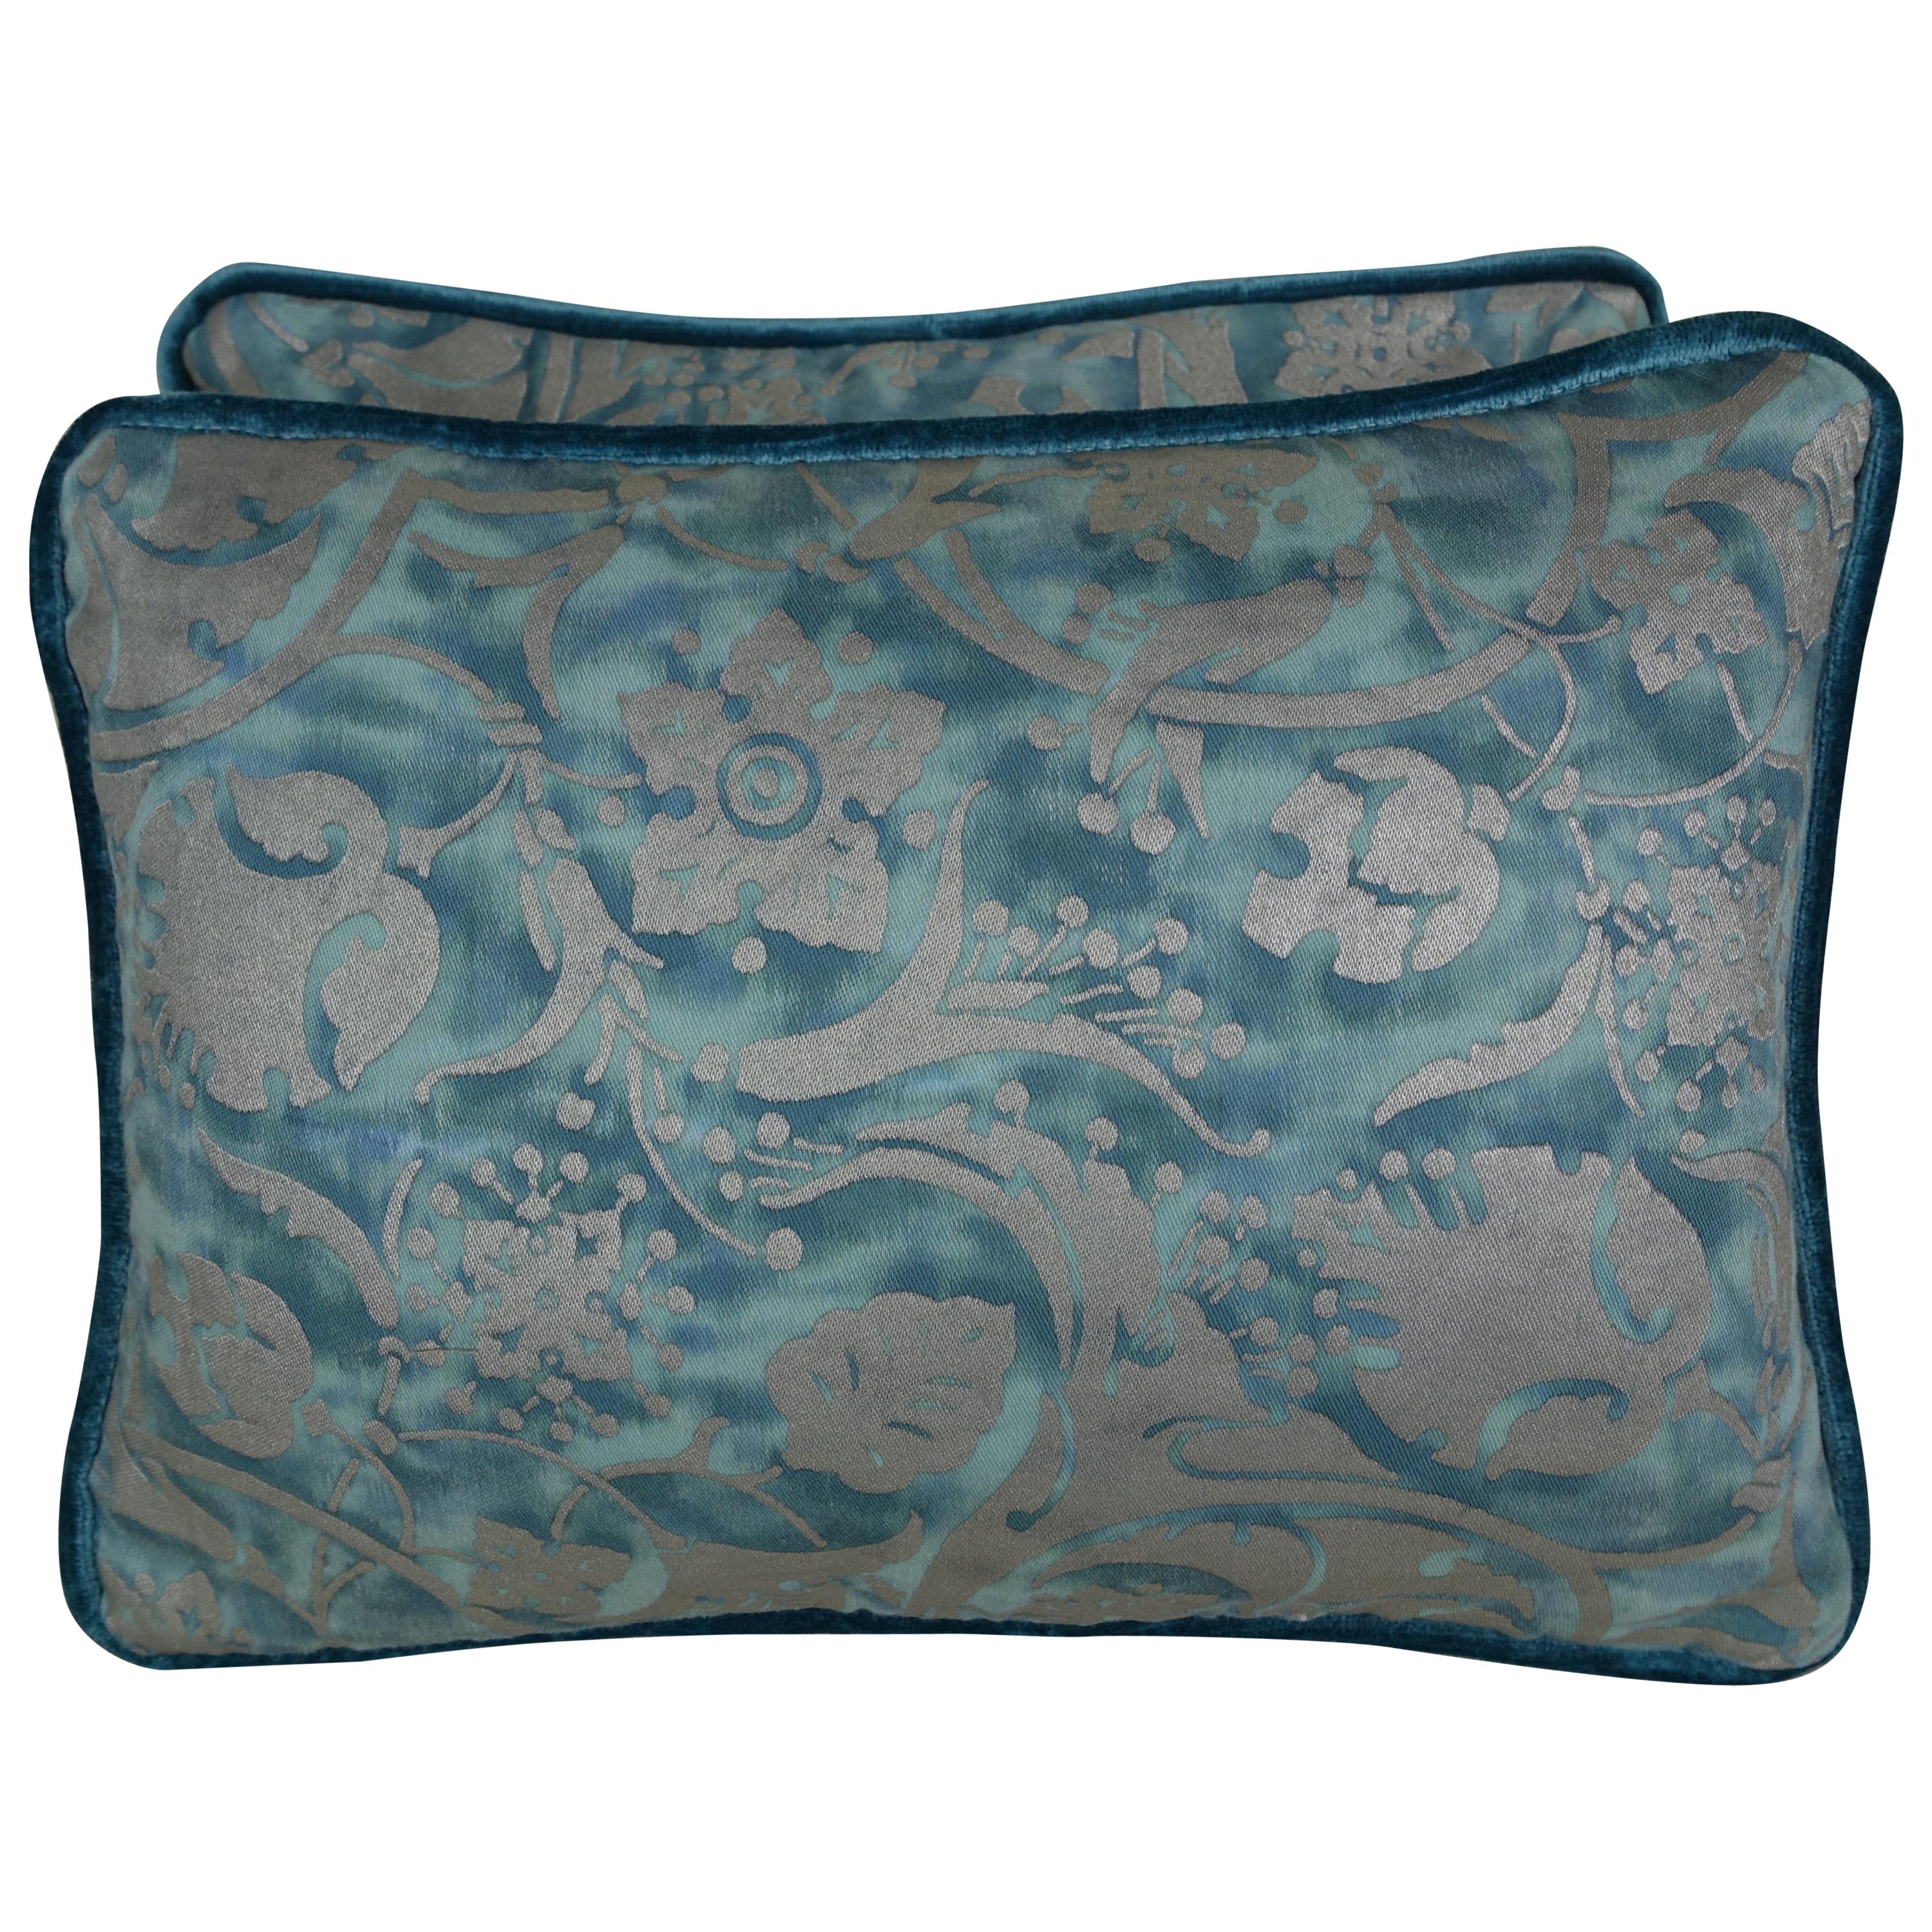 Persepolis Patterned Blue Fortuny Pillows, Pair